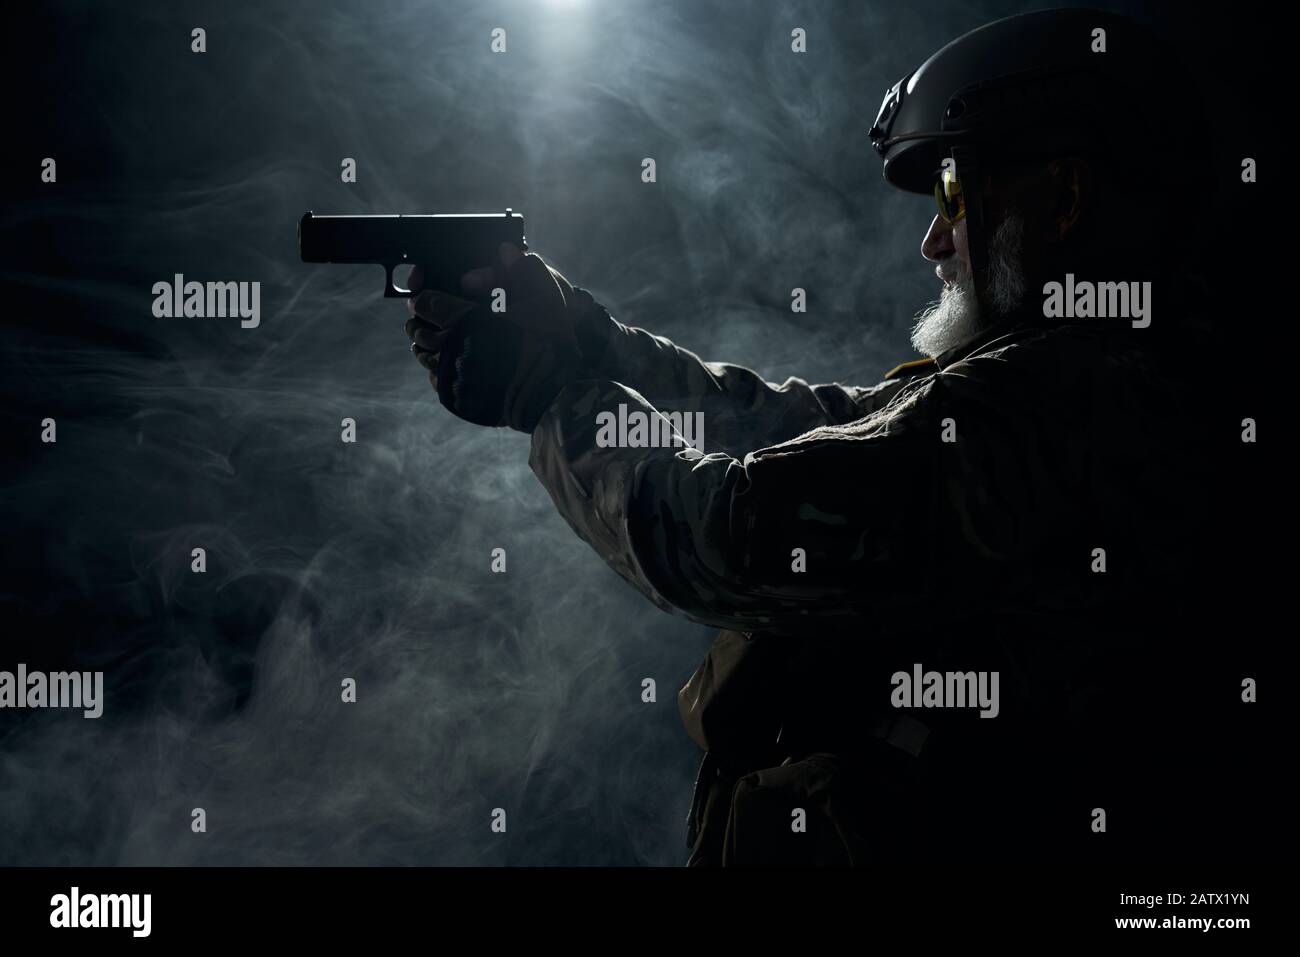 Side view of old military officer holding small gun and aiming. Portrait of bearded veteran in camouflage uniform and helmet shooting in smoky dark atmosphere. Concept of military. Stock Photo